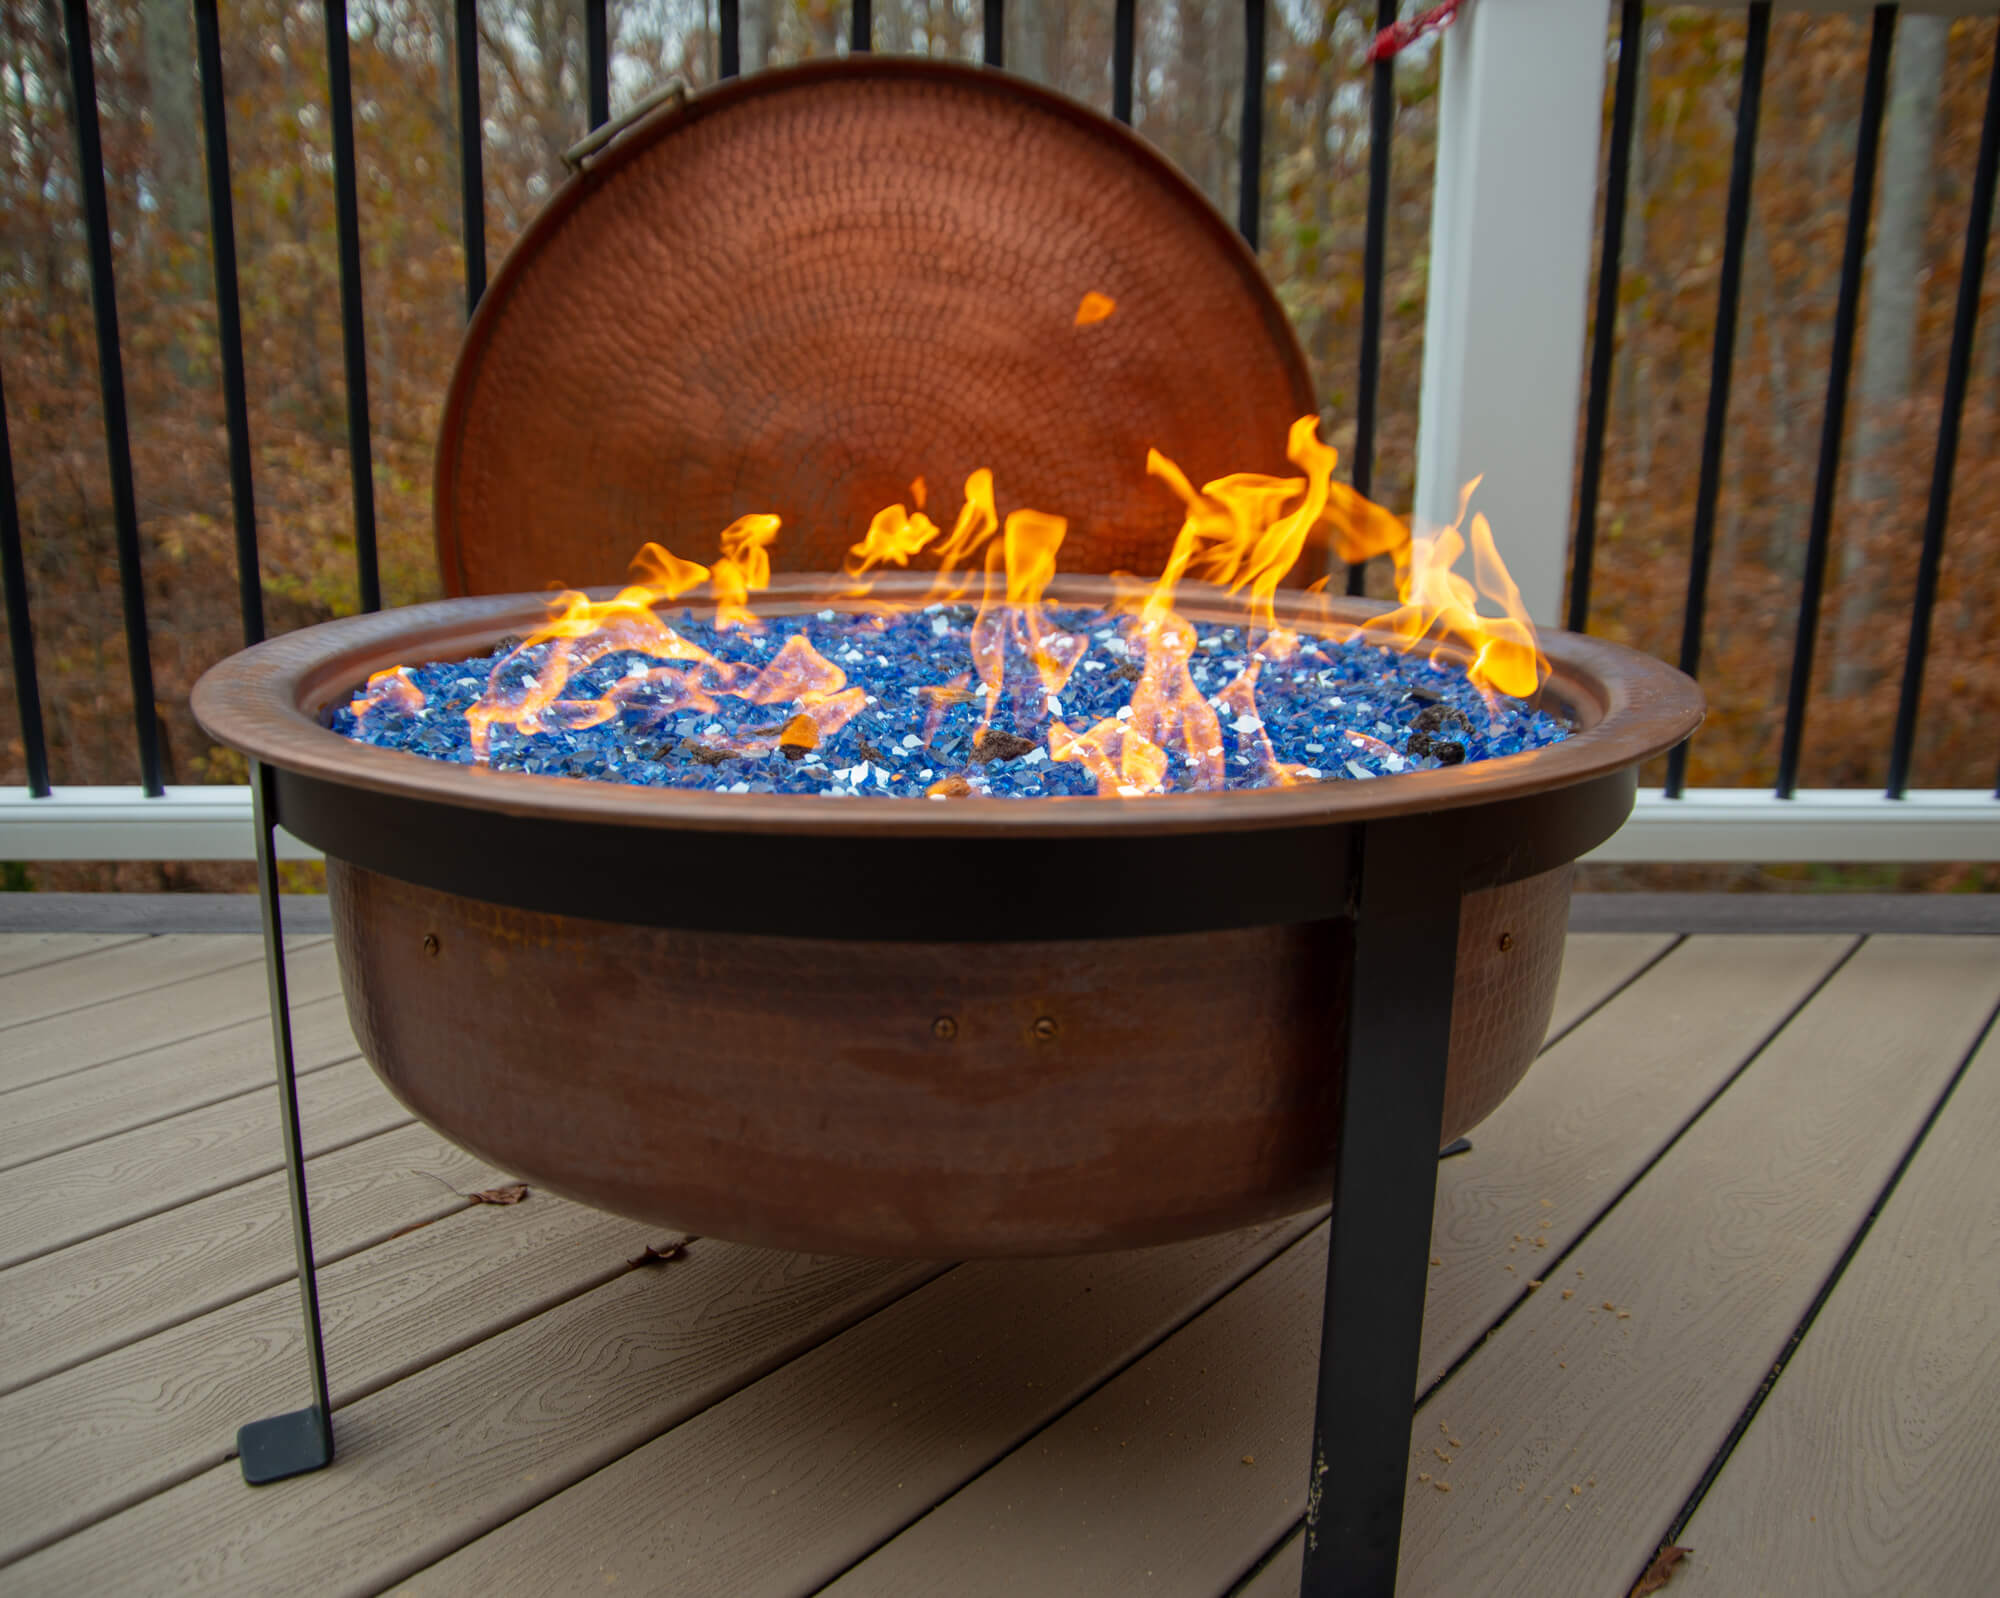 6 Ways To Put A Fire Pit On Wooden Deck, Are Gas Fire Pits Safe On Decks